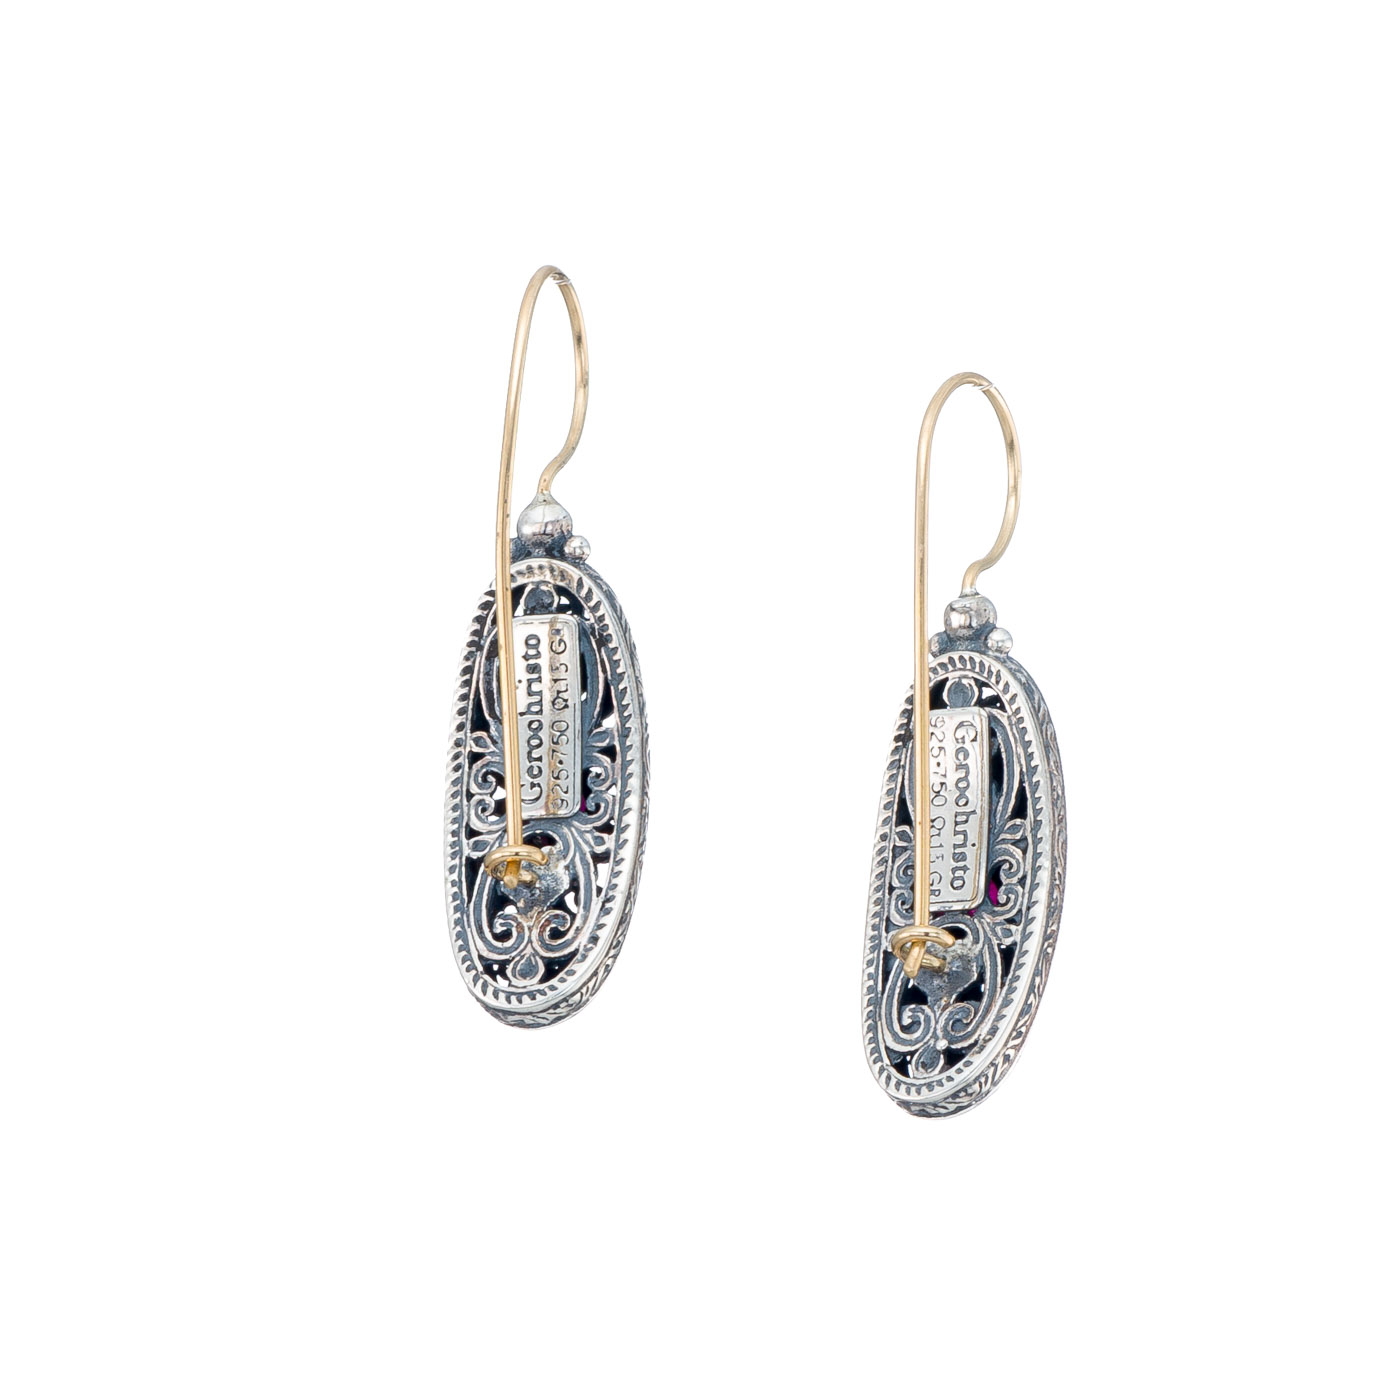 Mediterranean oval earrings in 18K Gold and Sterling silver with ruby